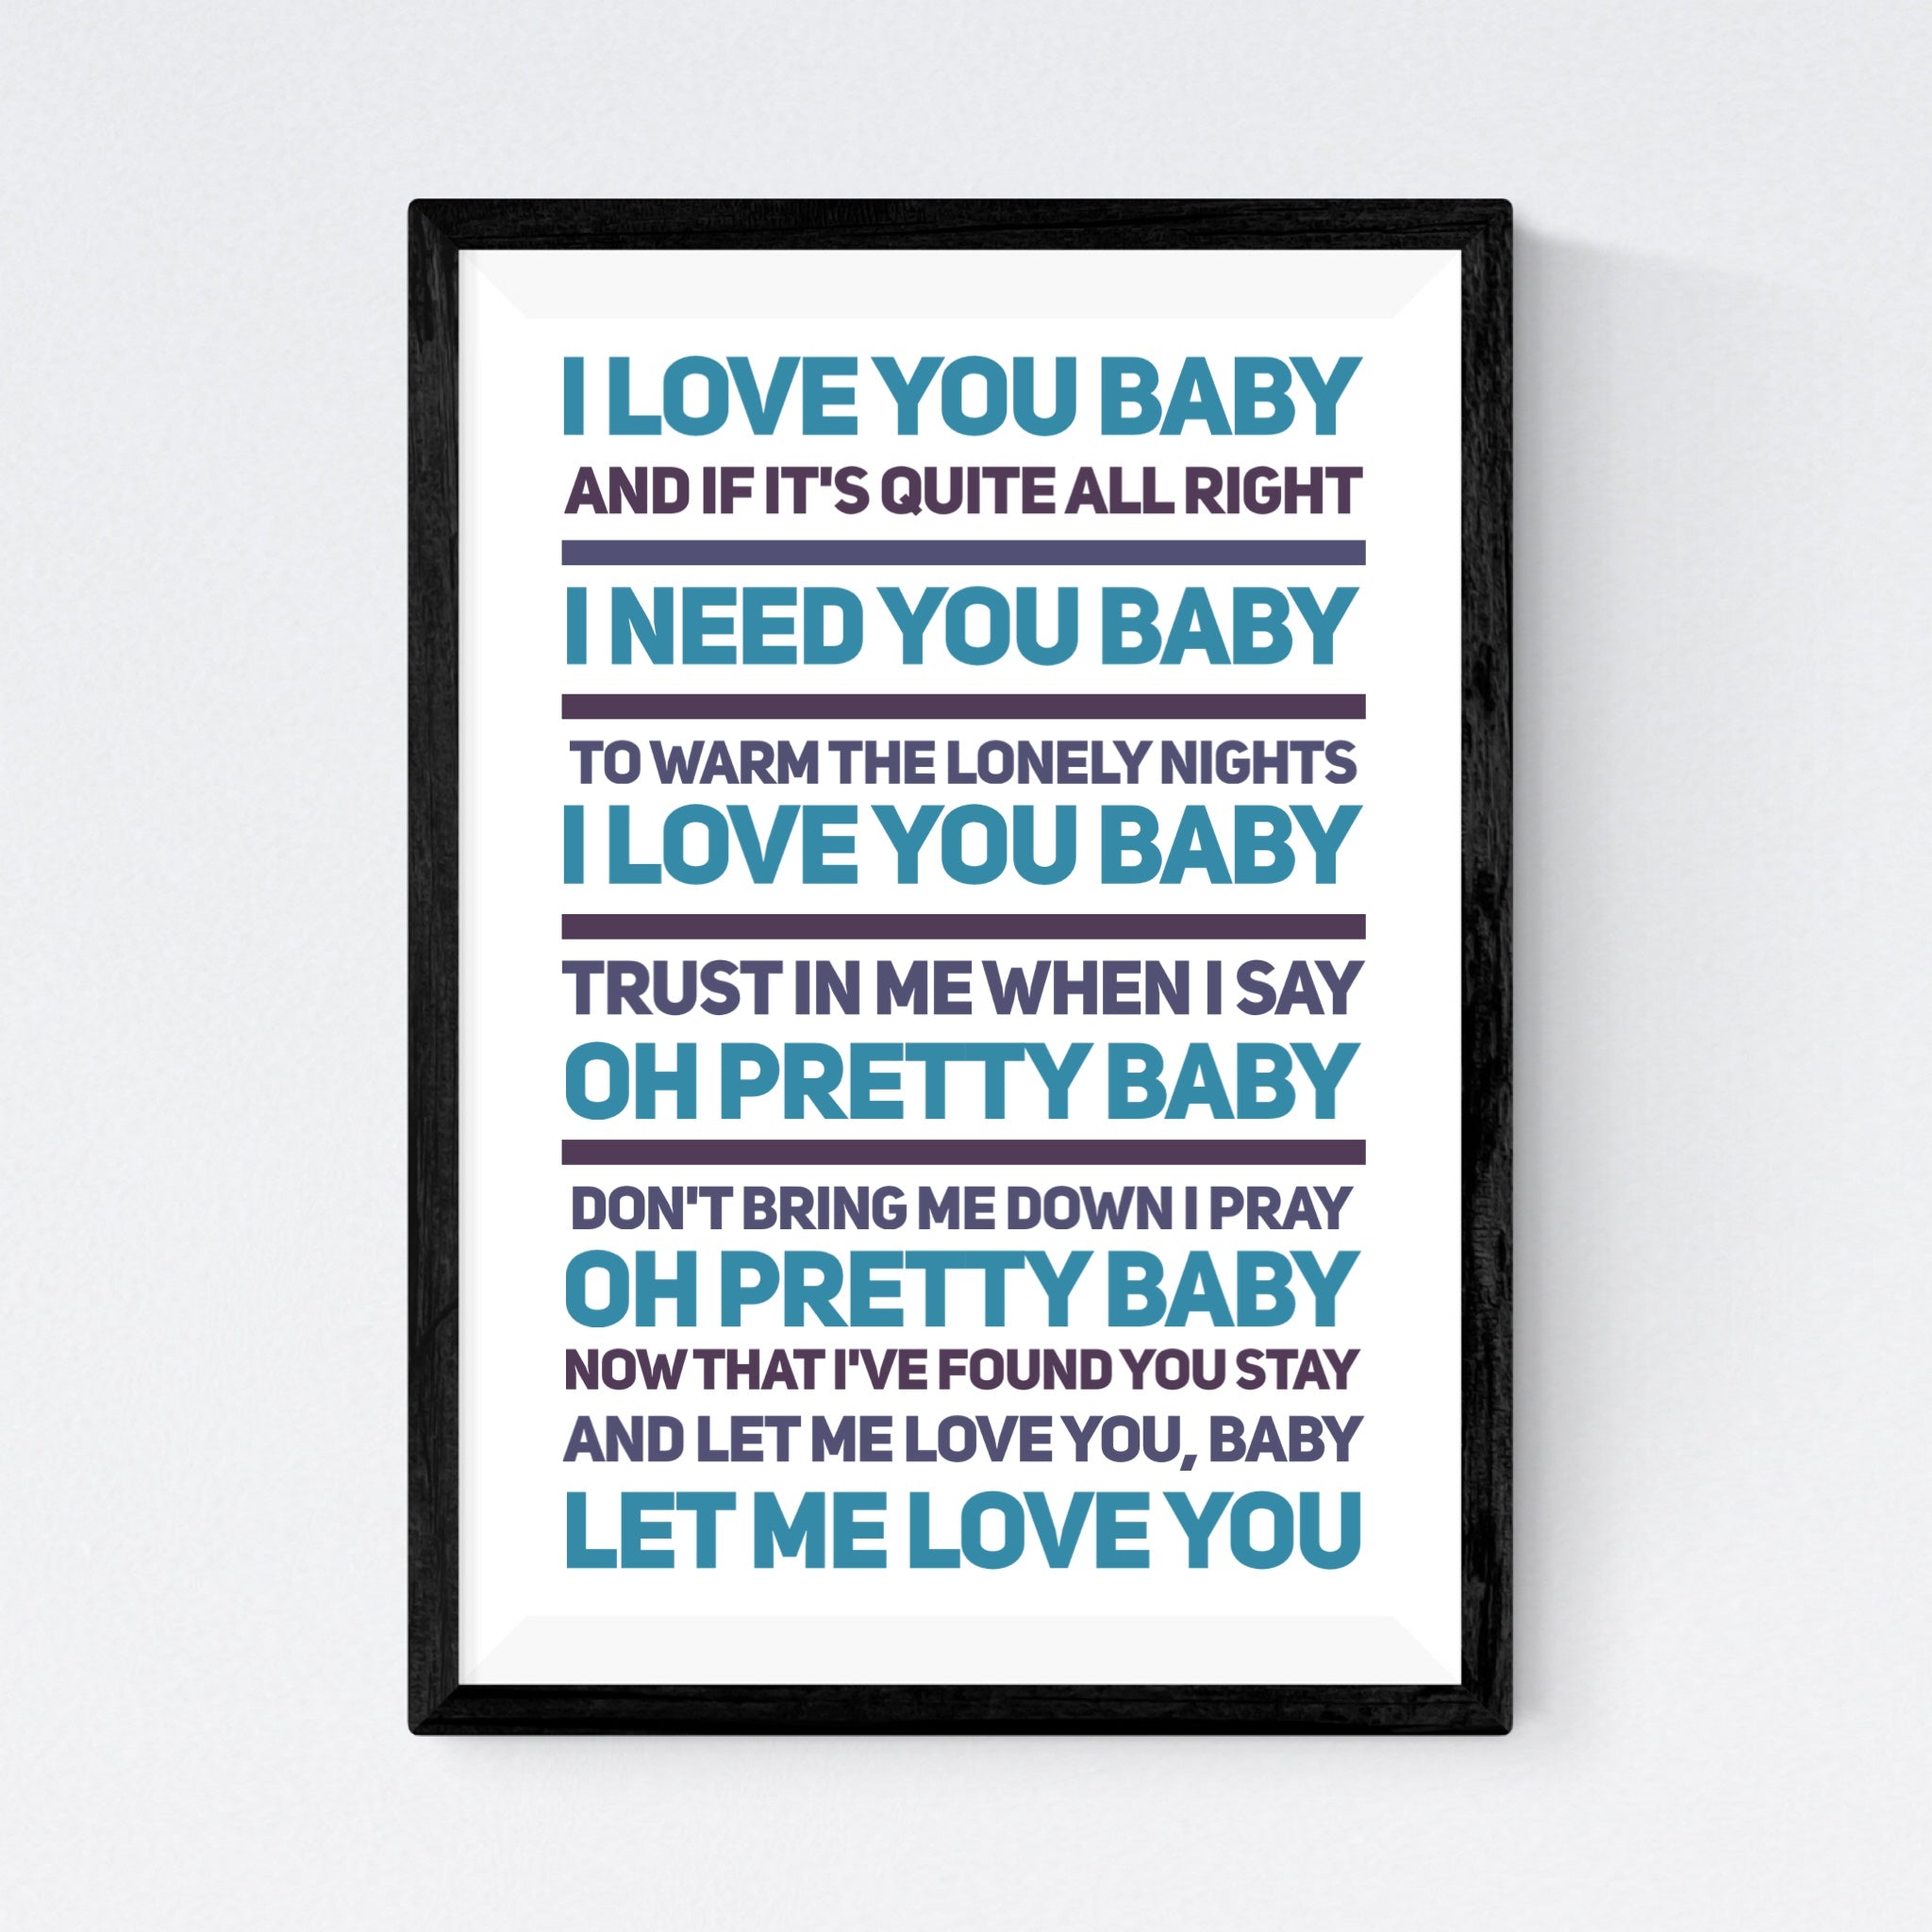 I Love You Baby Frank Sinatra First Dance Prints Co